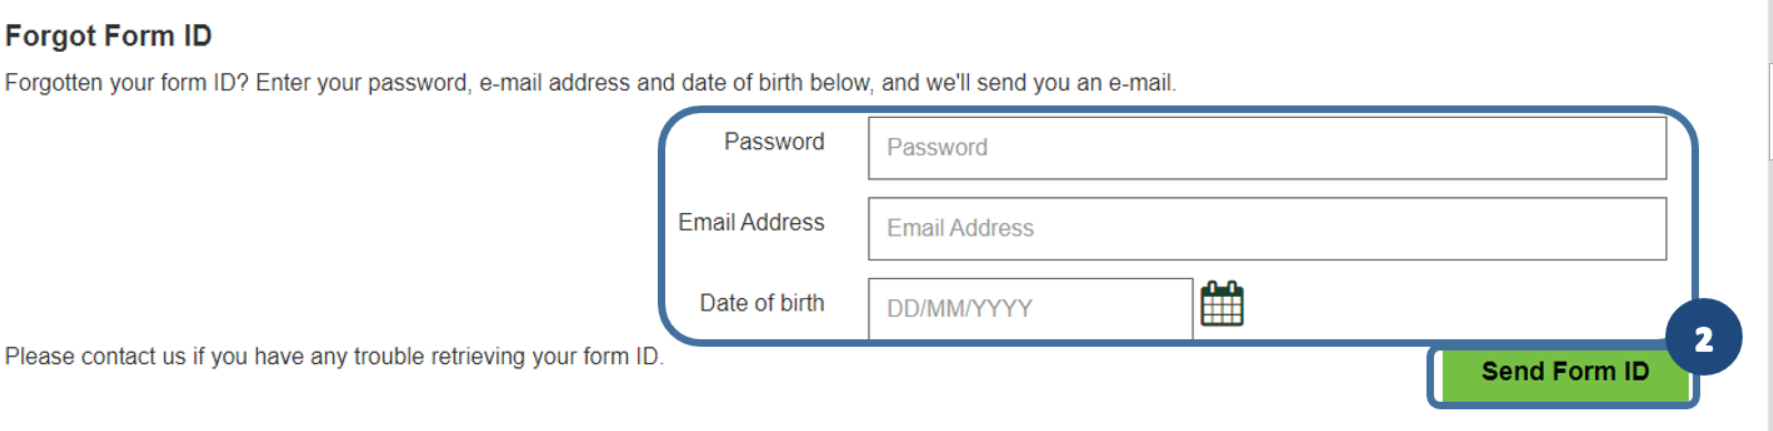 Enter your password, email address and Date of Birth, then click on Send Form ID